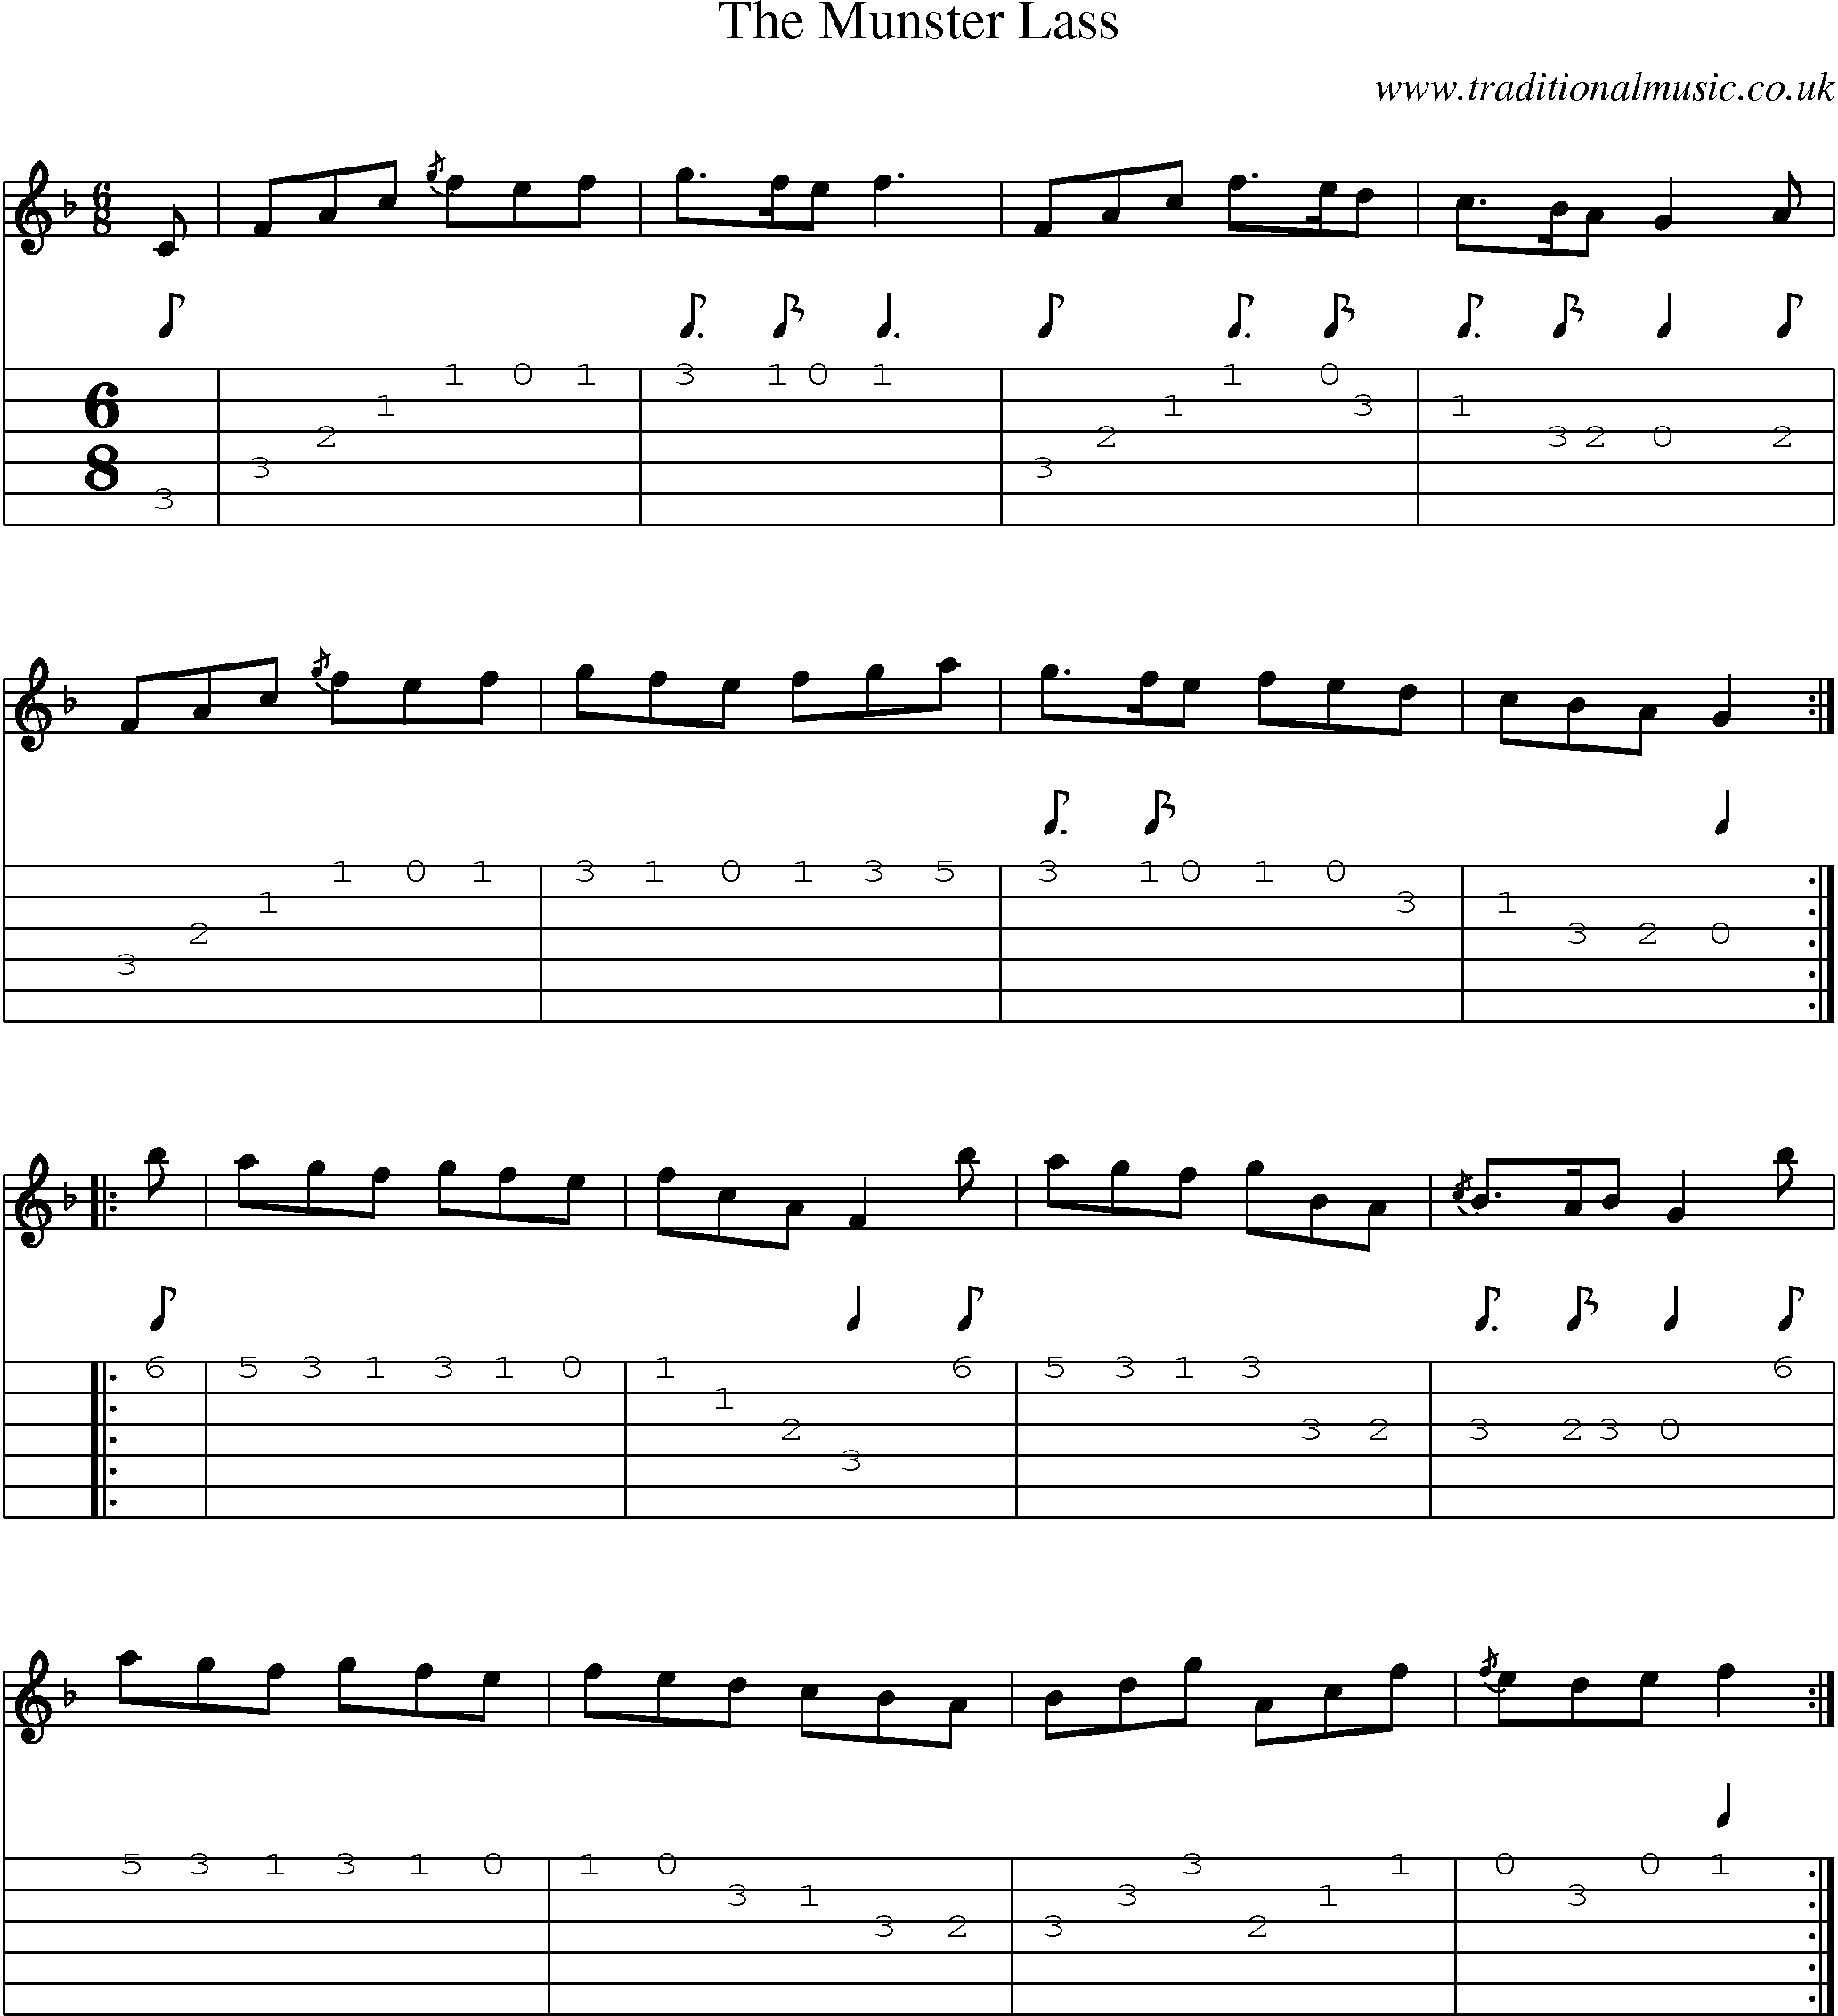 Music Score and Guitar Tabs for The Munster Lass